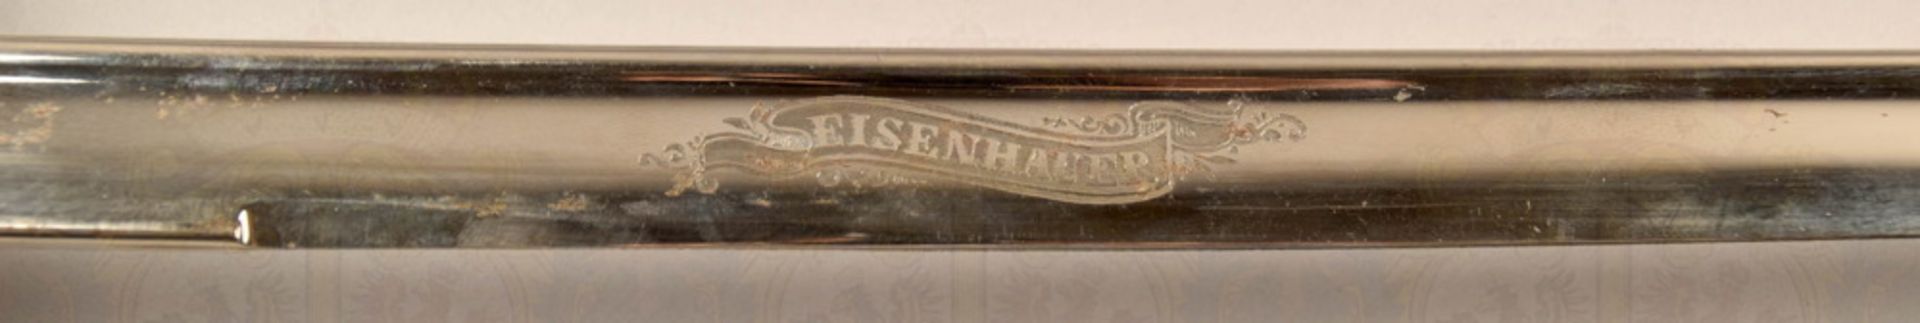 Sabre for Prussian supply train troops - Image 3 of 5